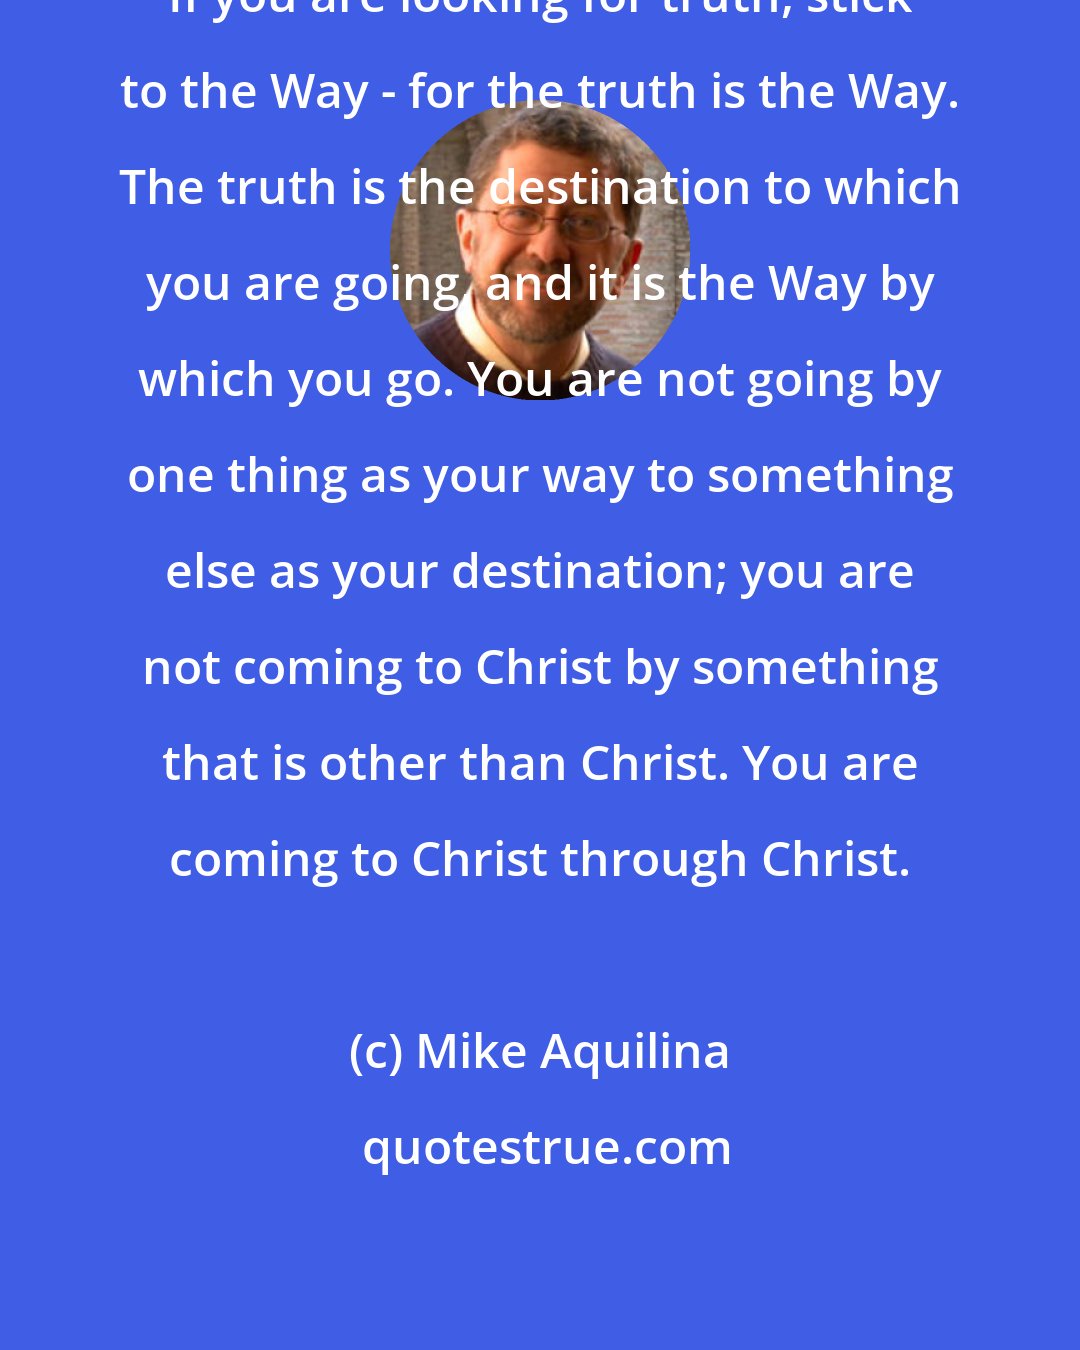 Mike Aquilina: If you are looking for truth, stick to the Way - for the truth is the Way. The truth is the destination to which you are going, and it is the Way by which you go. You are not going by one thing as your way to something else as your destination; you are not coming to Christ by something that is other than Christ. You are coming to Christ through Christ.